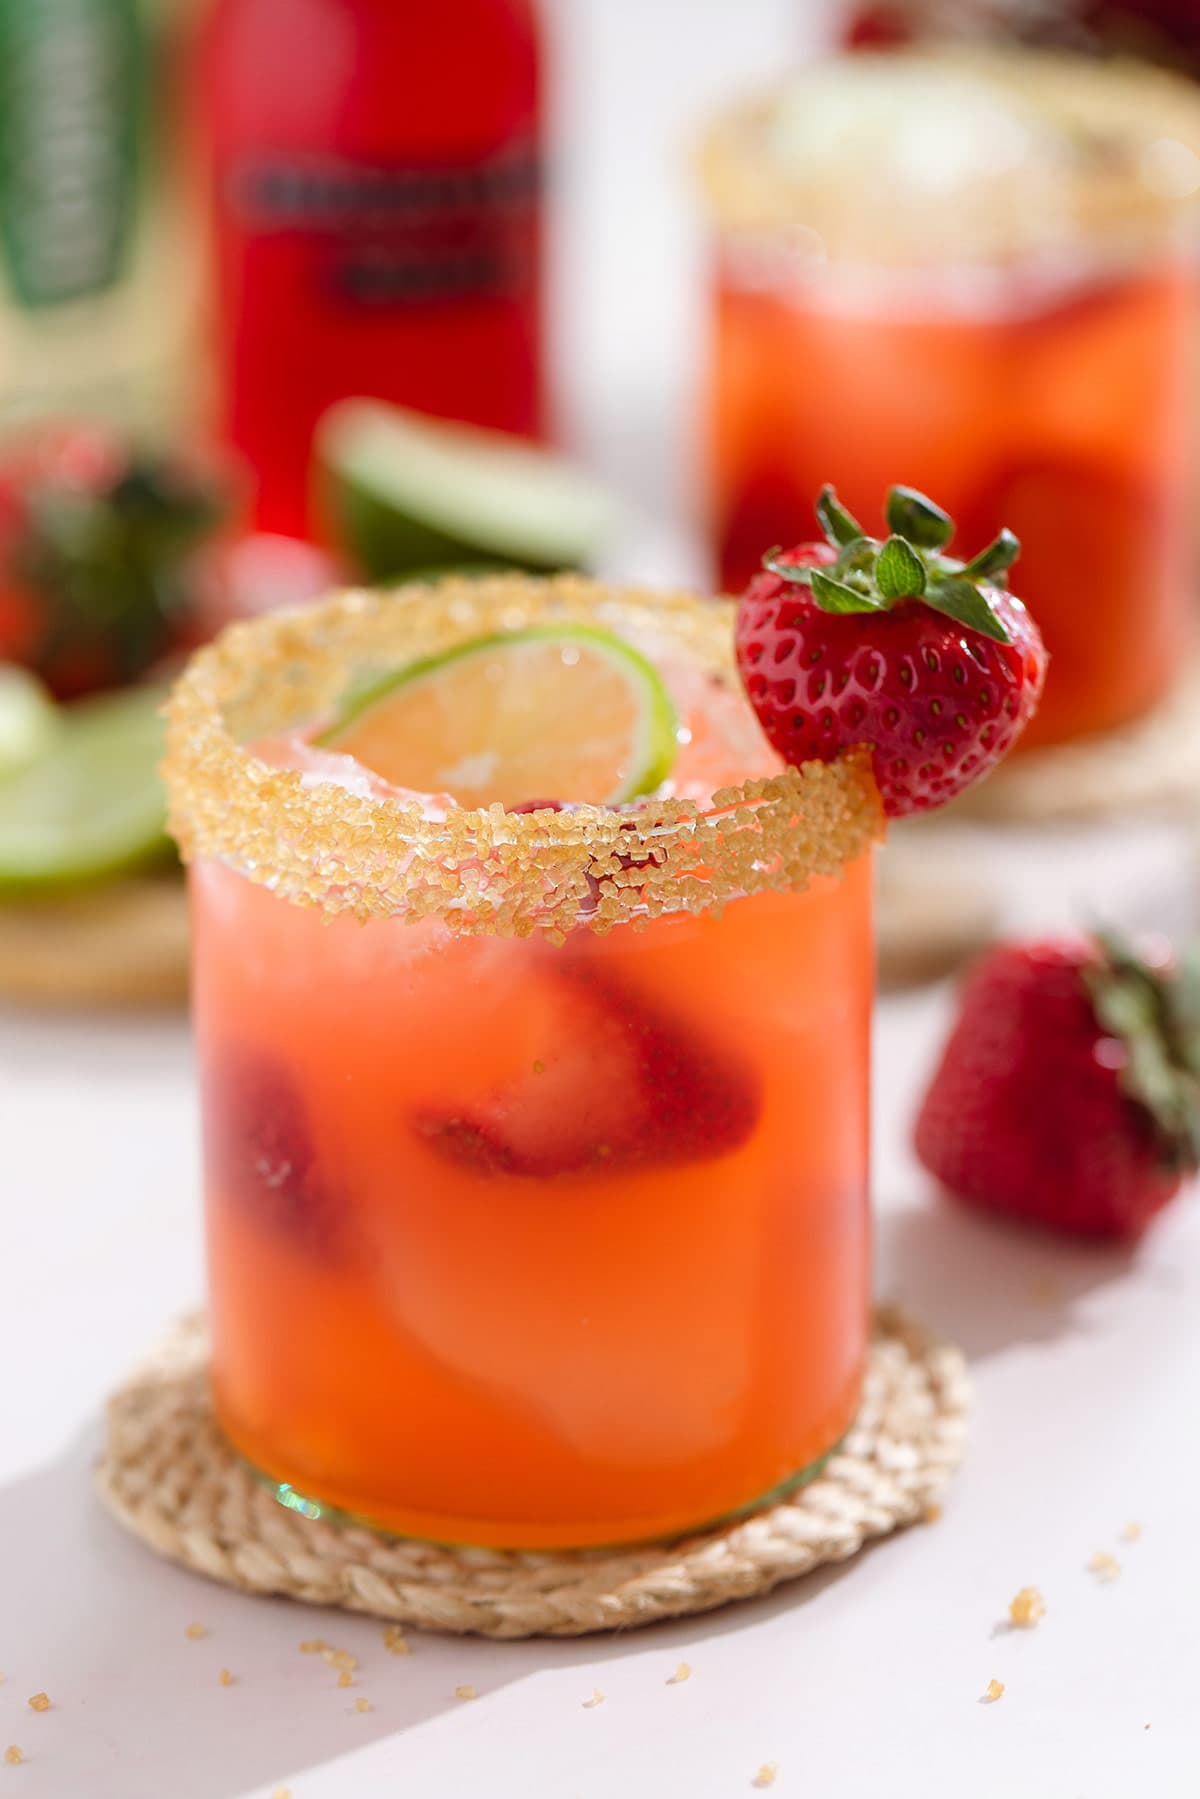 Light red margarita in a short glass garnished with coarse sugar on the rim and a strawberry on a woven coaster.